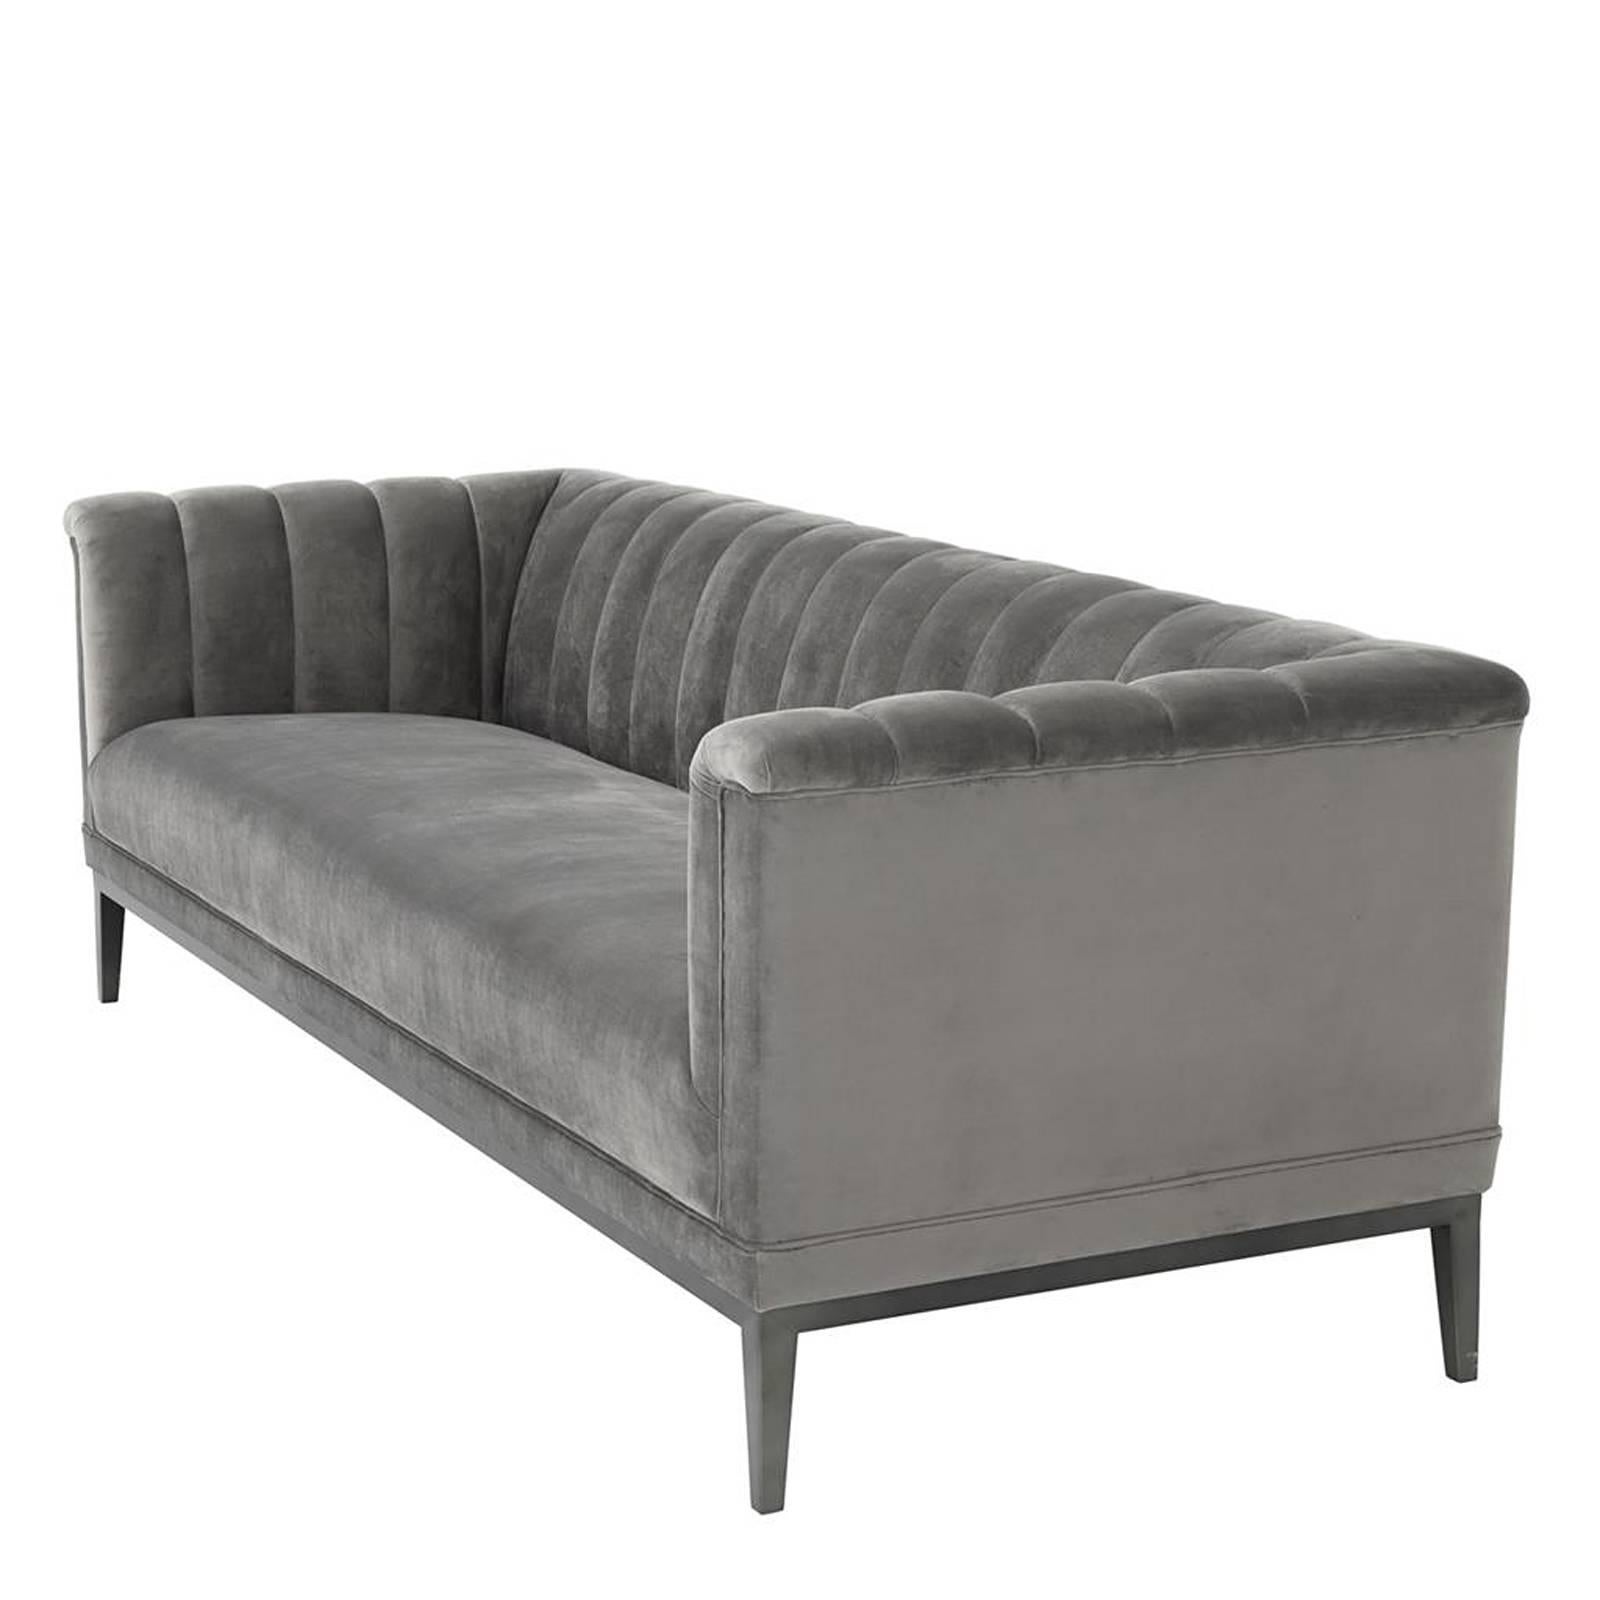 Chinese Stepper Sofa with Porpoise Grey Fabric